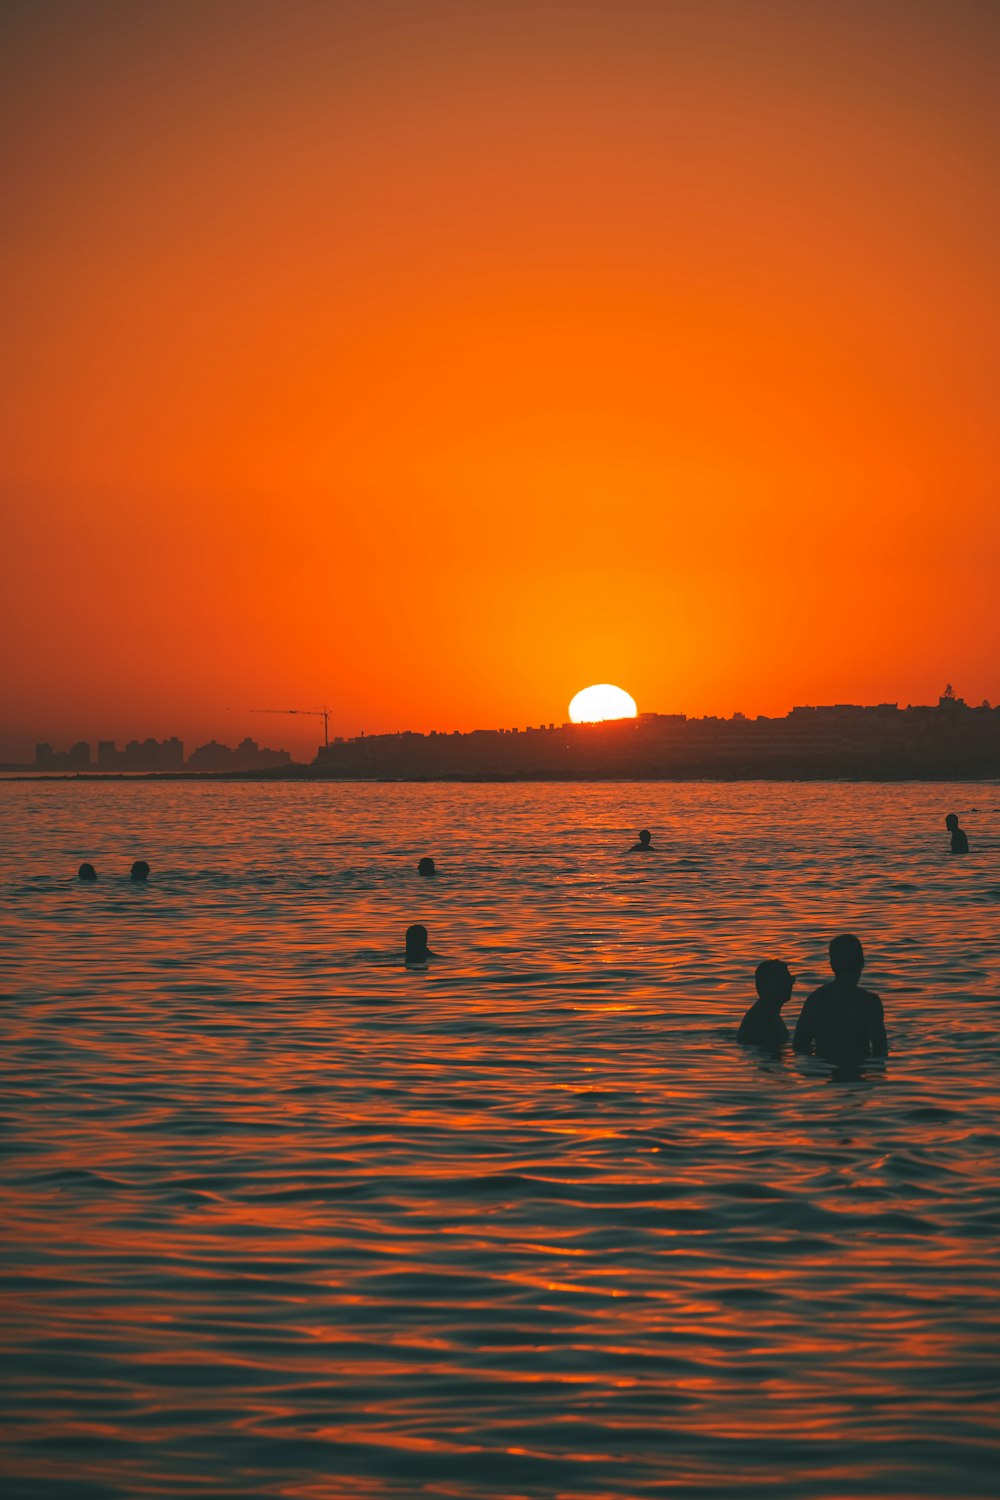 a group of people swimming in the ocean at sunset